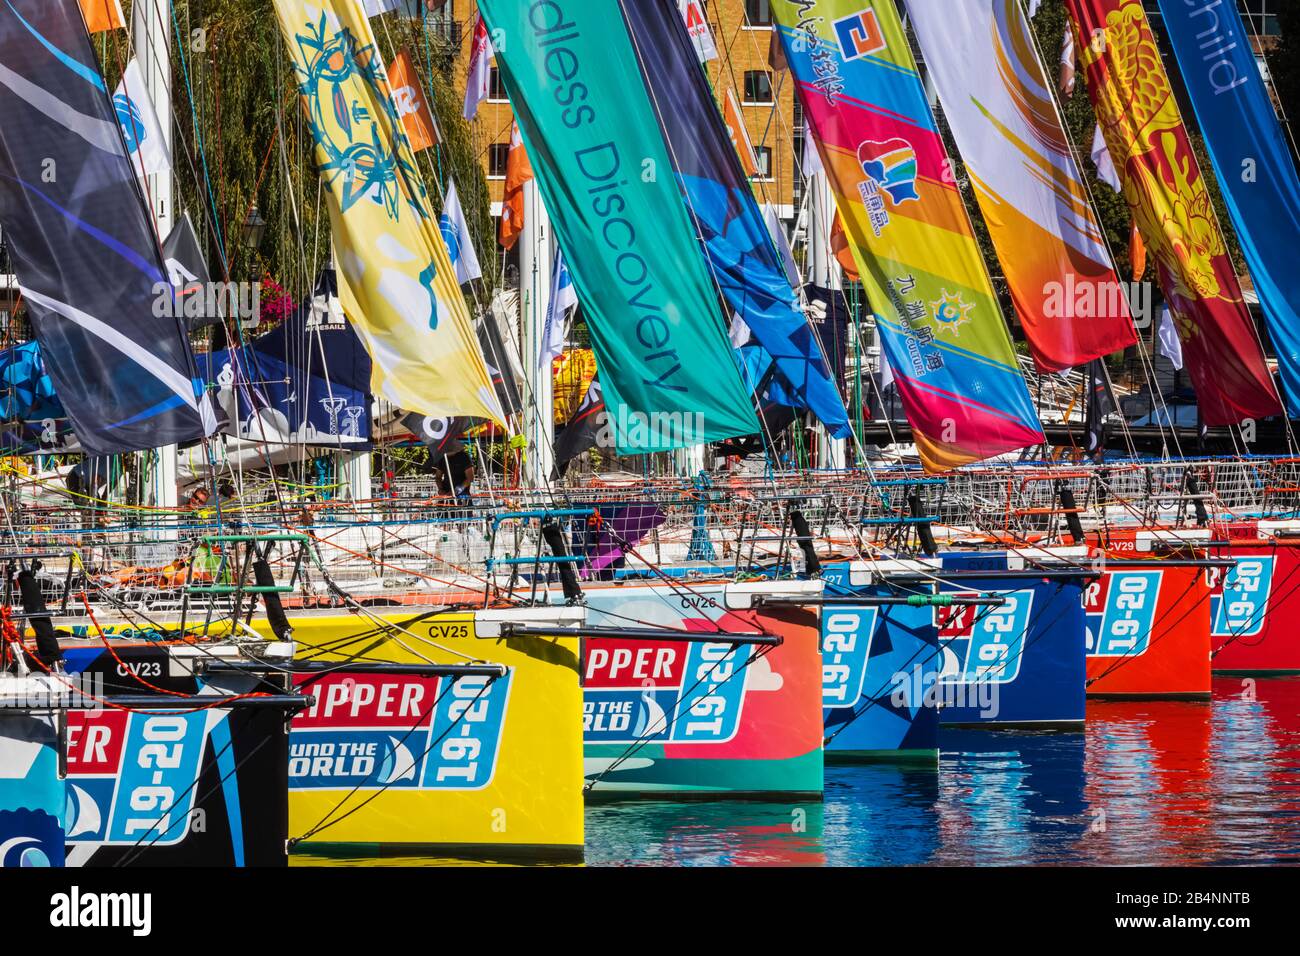 England, London, Wapping, St.Katharine Docks Marina, Colourful Clippers Awaiting The Start of The Bi-Annual Clipper Round The World Yacht Race Stock Photo